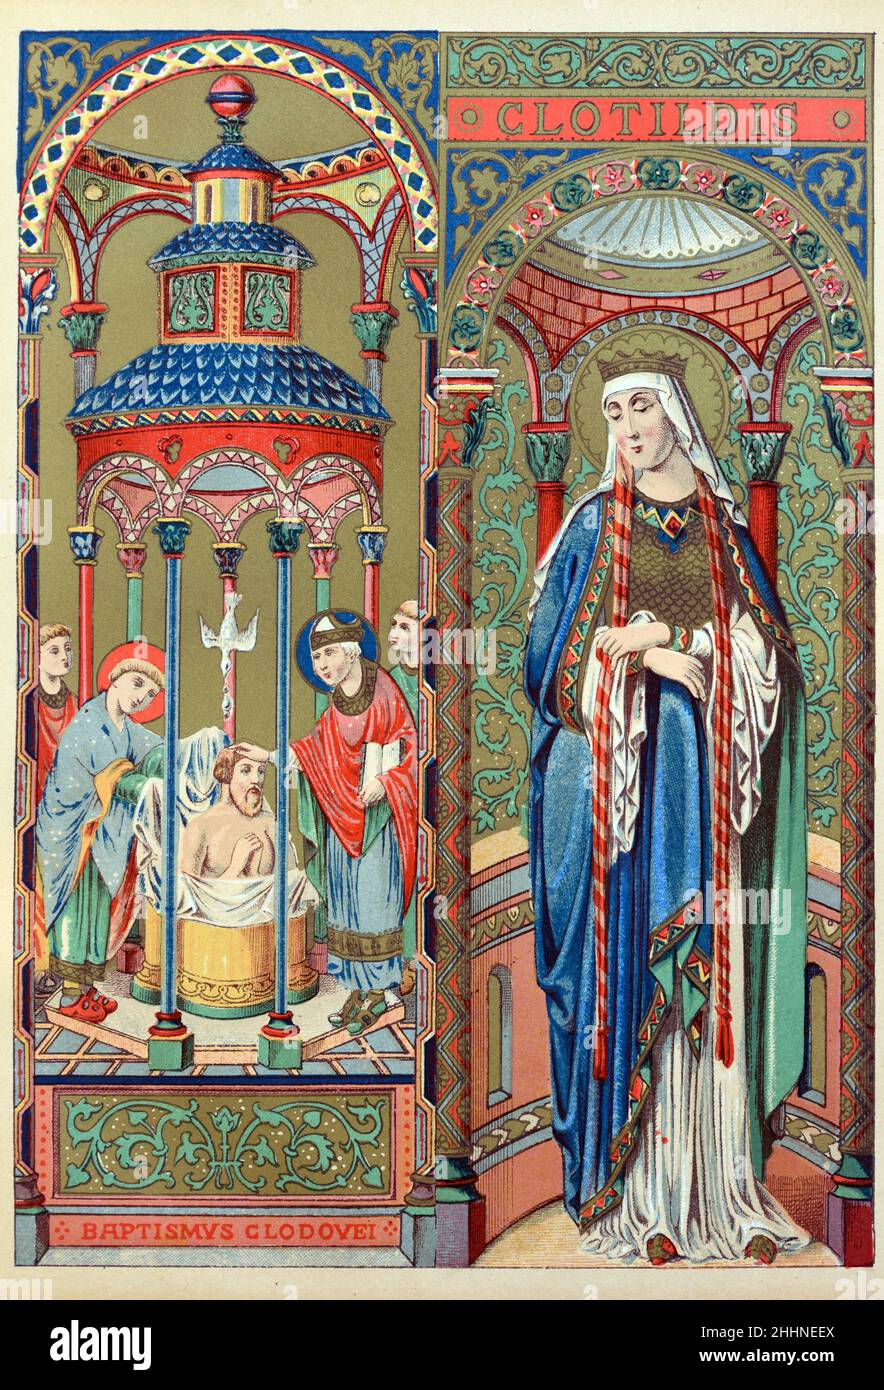 Saint Clotilde (c474-545) Queen of All the Franks France & Baptism of King Clovis I. Chromolithograph 1887 Edition of Butler's Lives of the Saints. Stock Photo